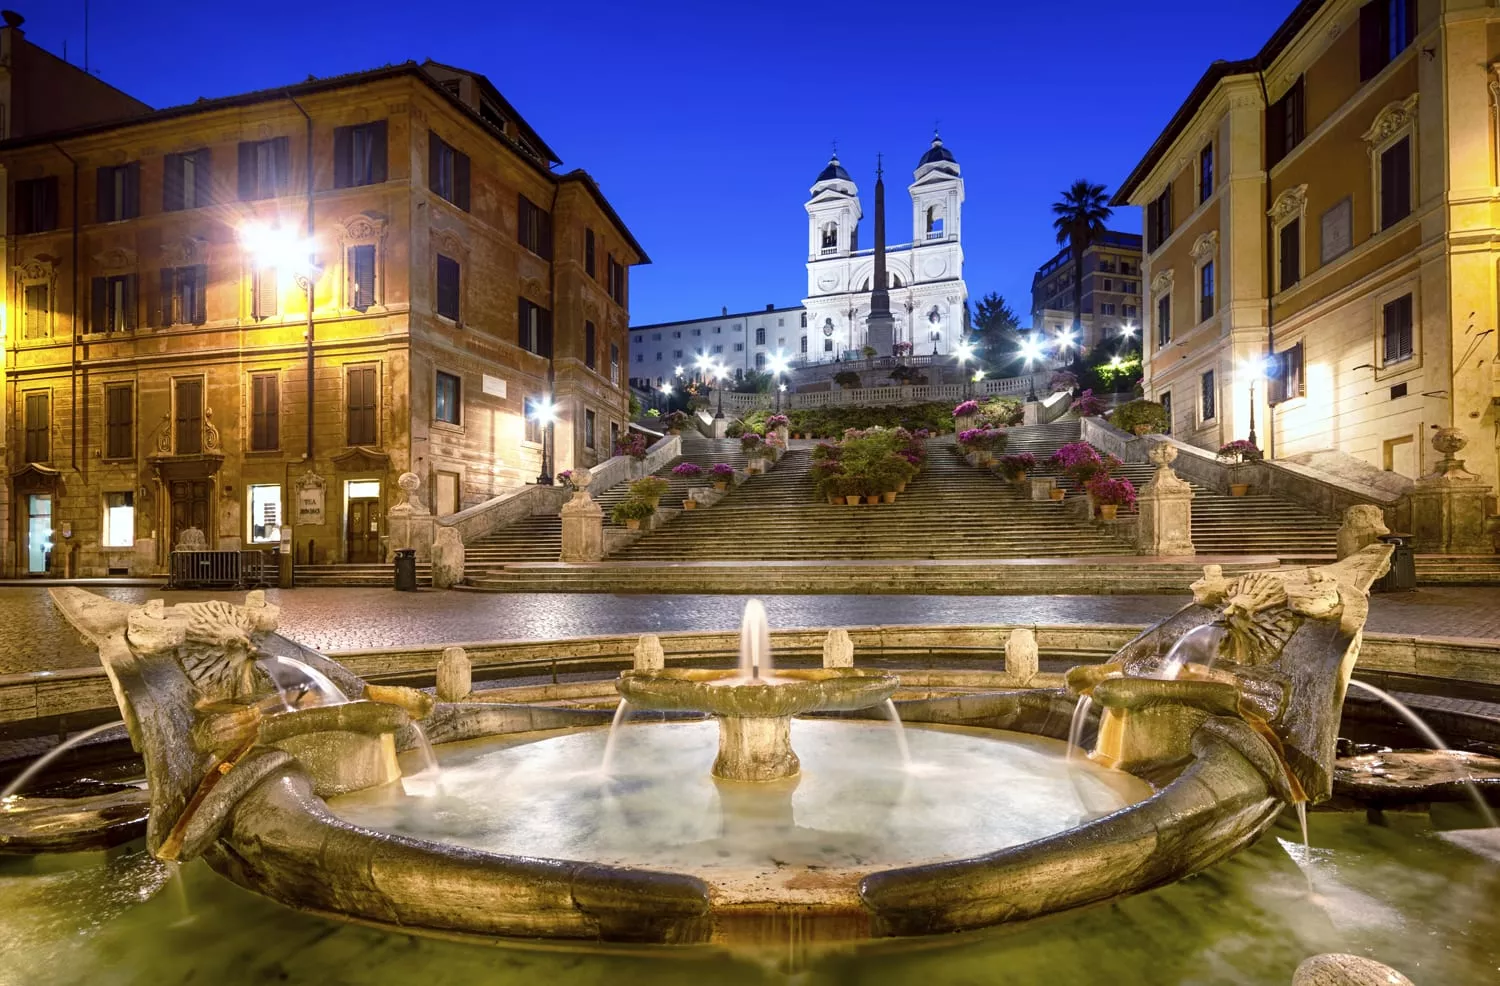 Spanish Steps in Italy, Europe | Architecture - Rated 4.6